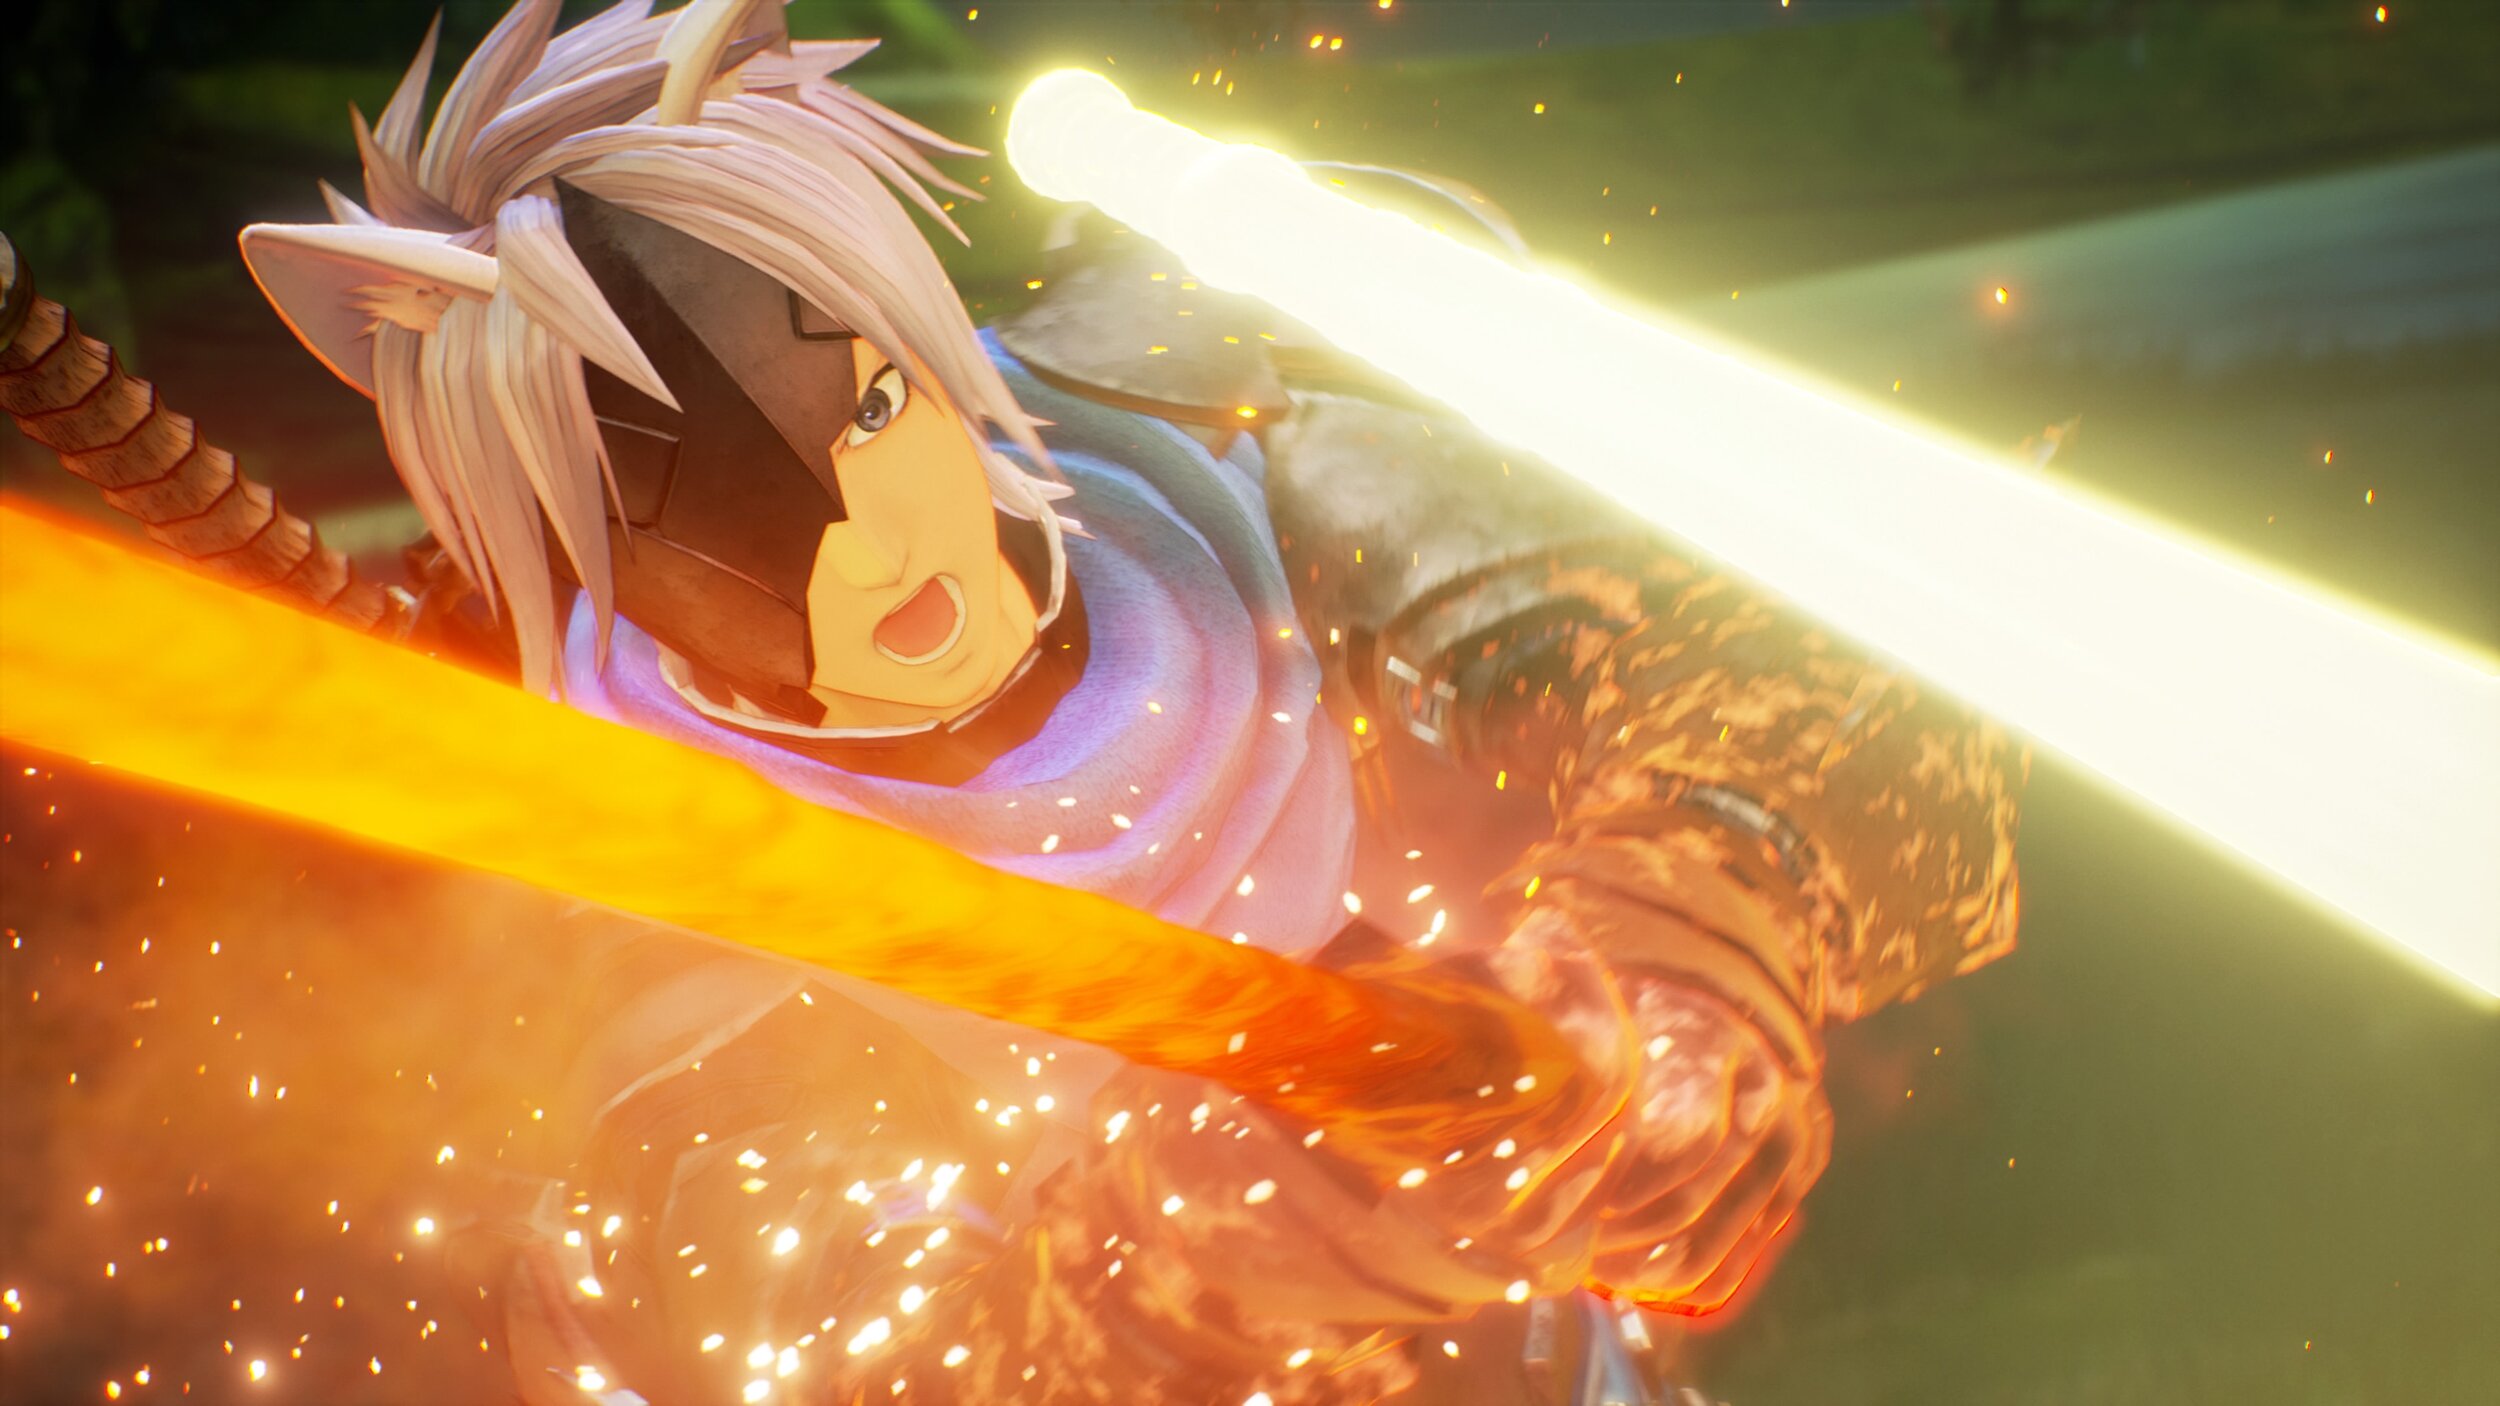 Tales of Arise review